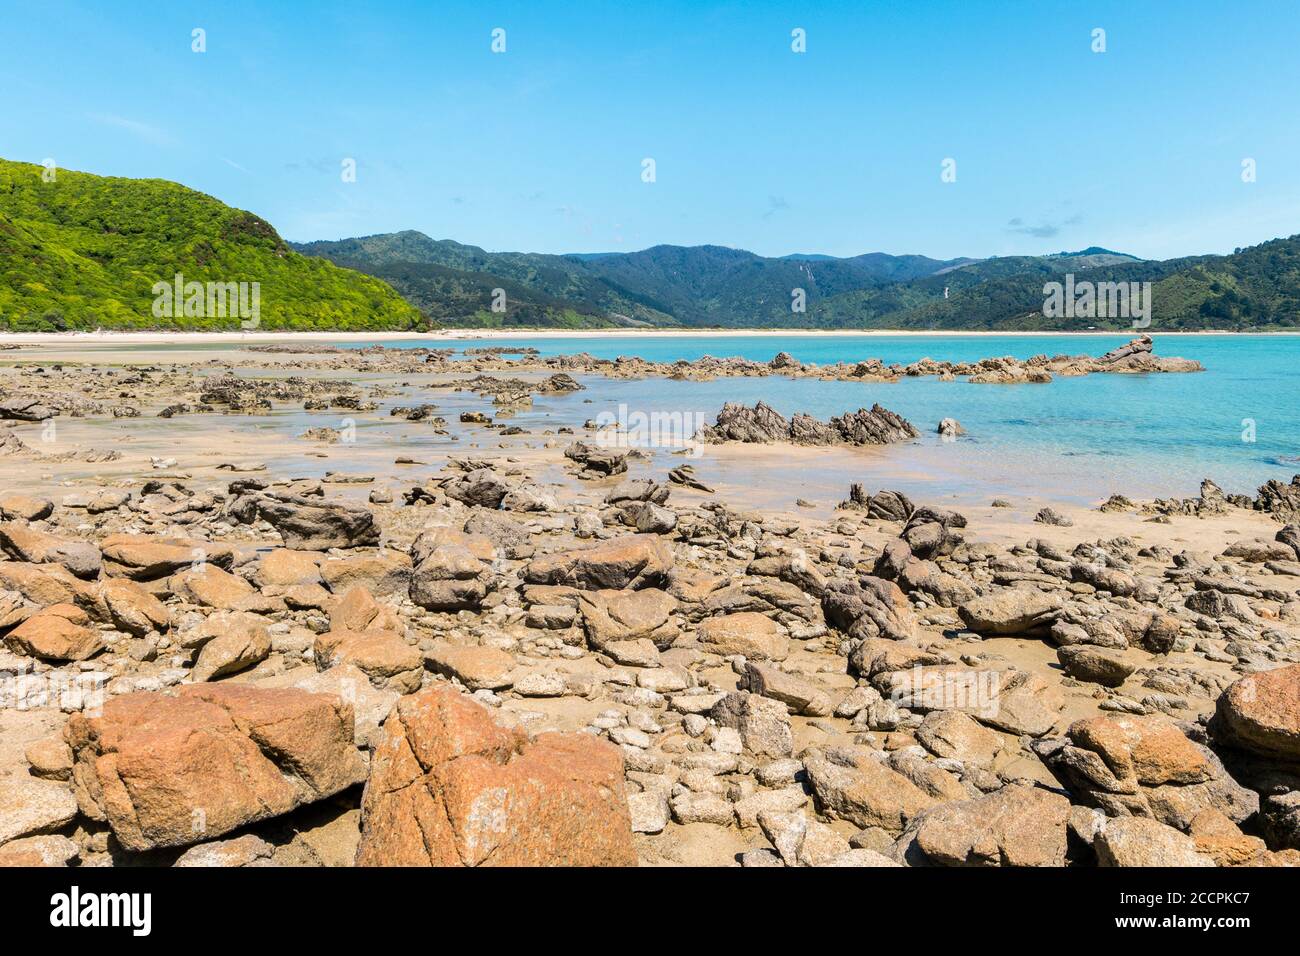 The rocks beach is just next to the shallow and turquoise ocean. In the background lay temperate forests and hills with blue skies. Stock Photo